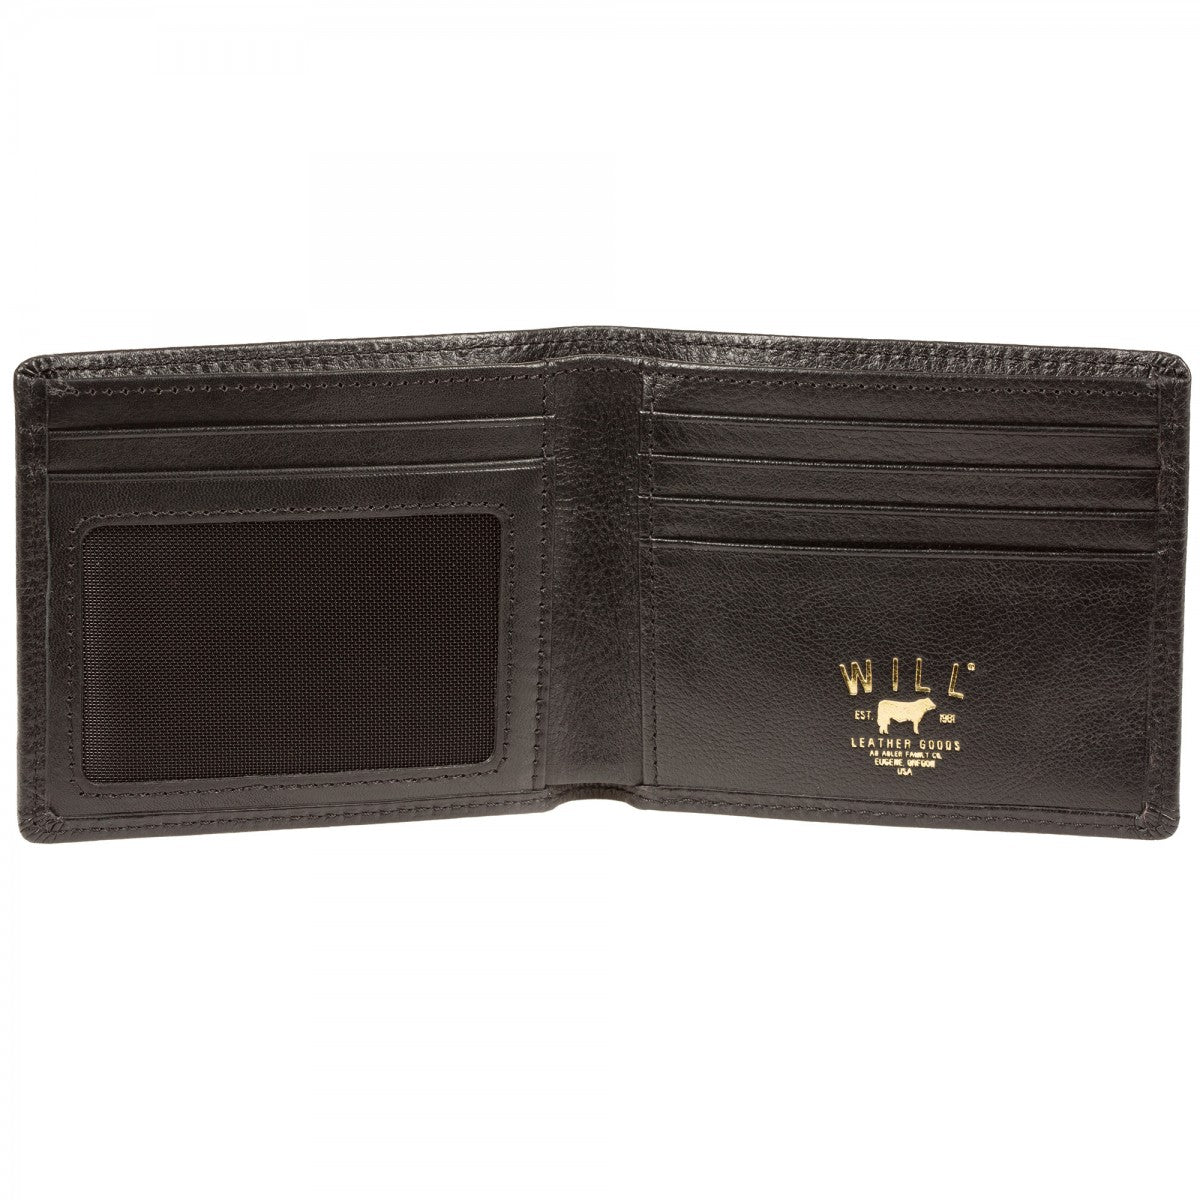 Will Leather Goods Classic Bifold Black Leather Wallet, Vegetable Tanned, Top Grain Leather, 4.5" x 3.75"